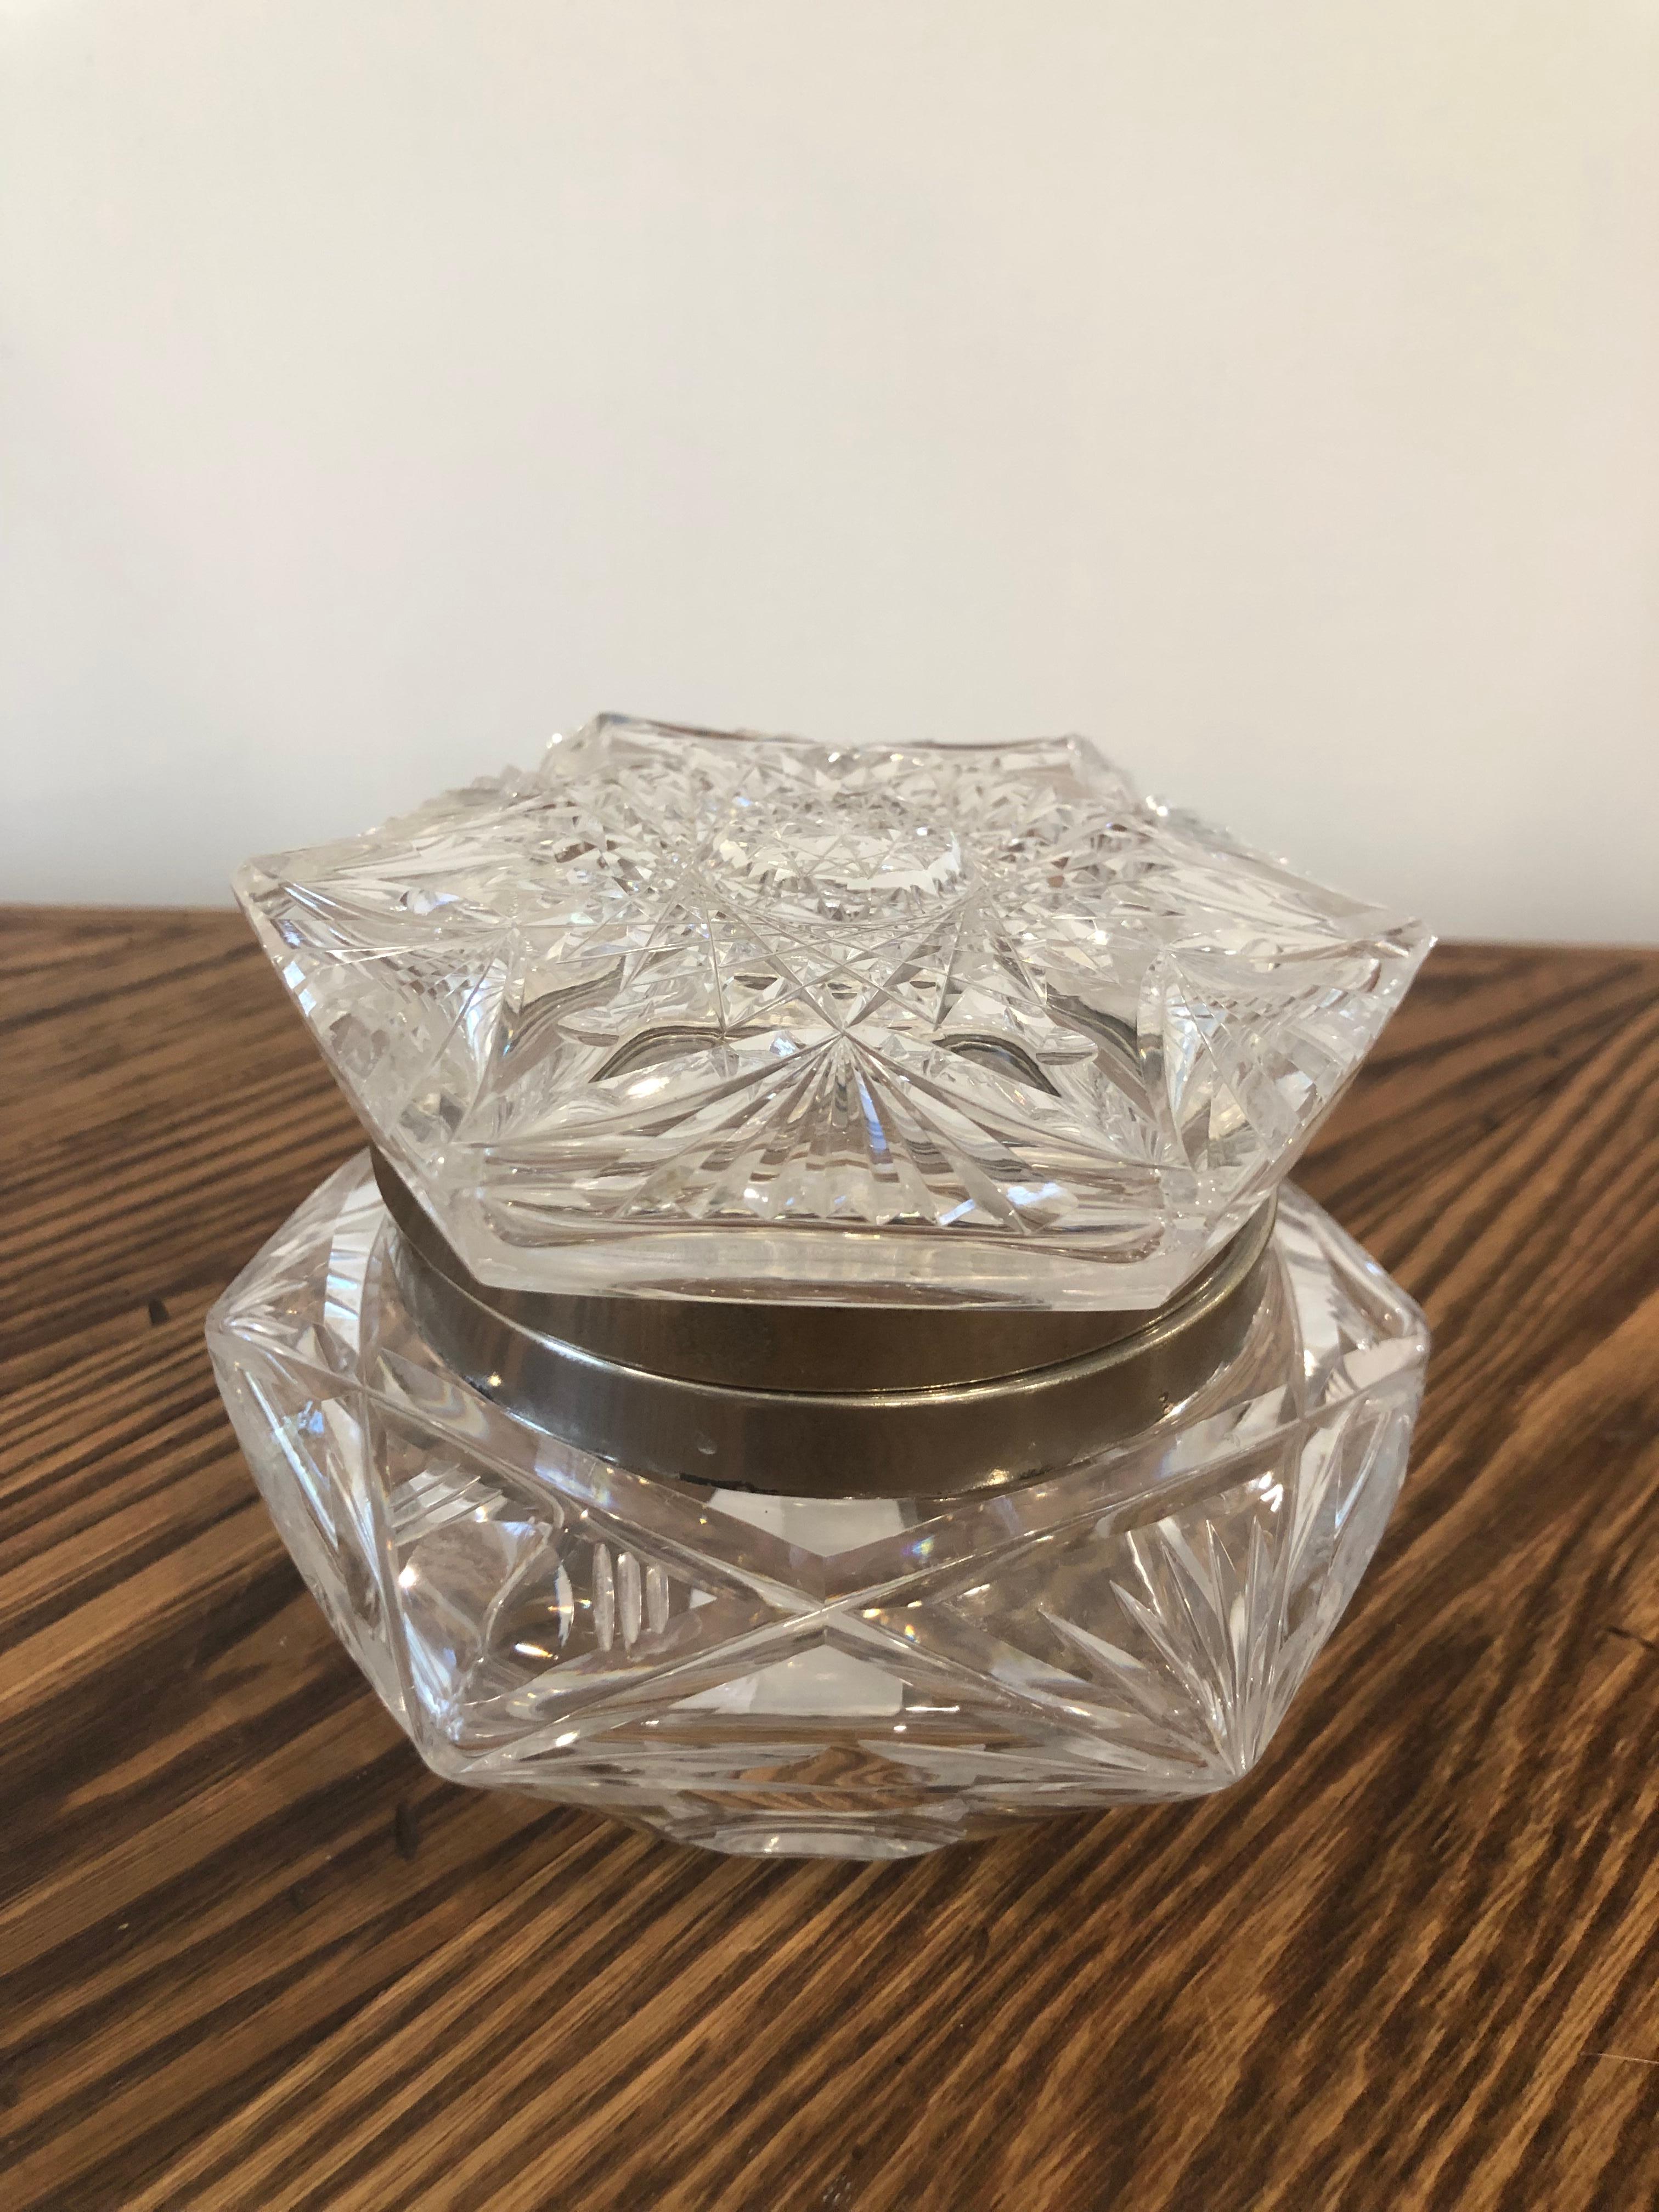 Beautiful antique Sunburst cut crystal octagon shaped box, a nice size that would look fantastic on a vanity or dresser.